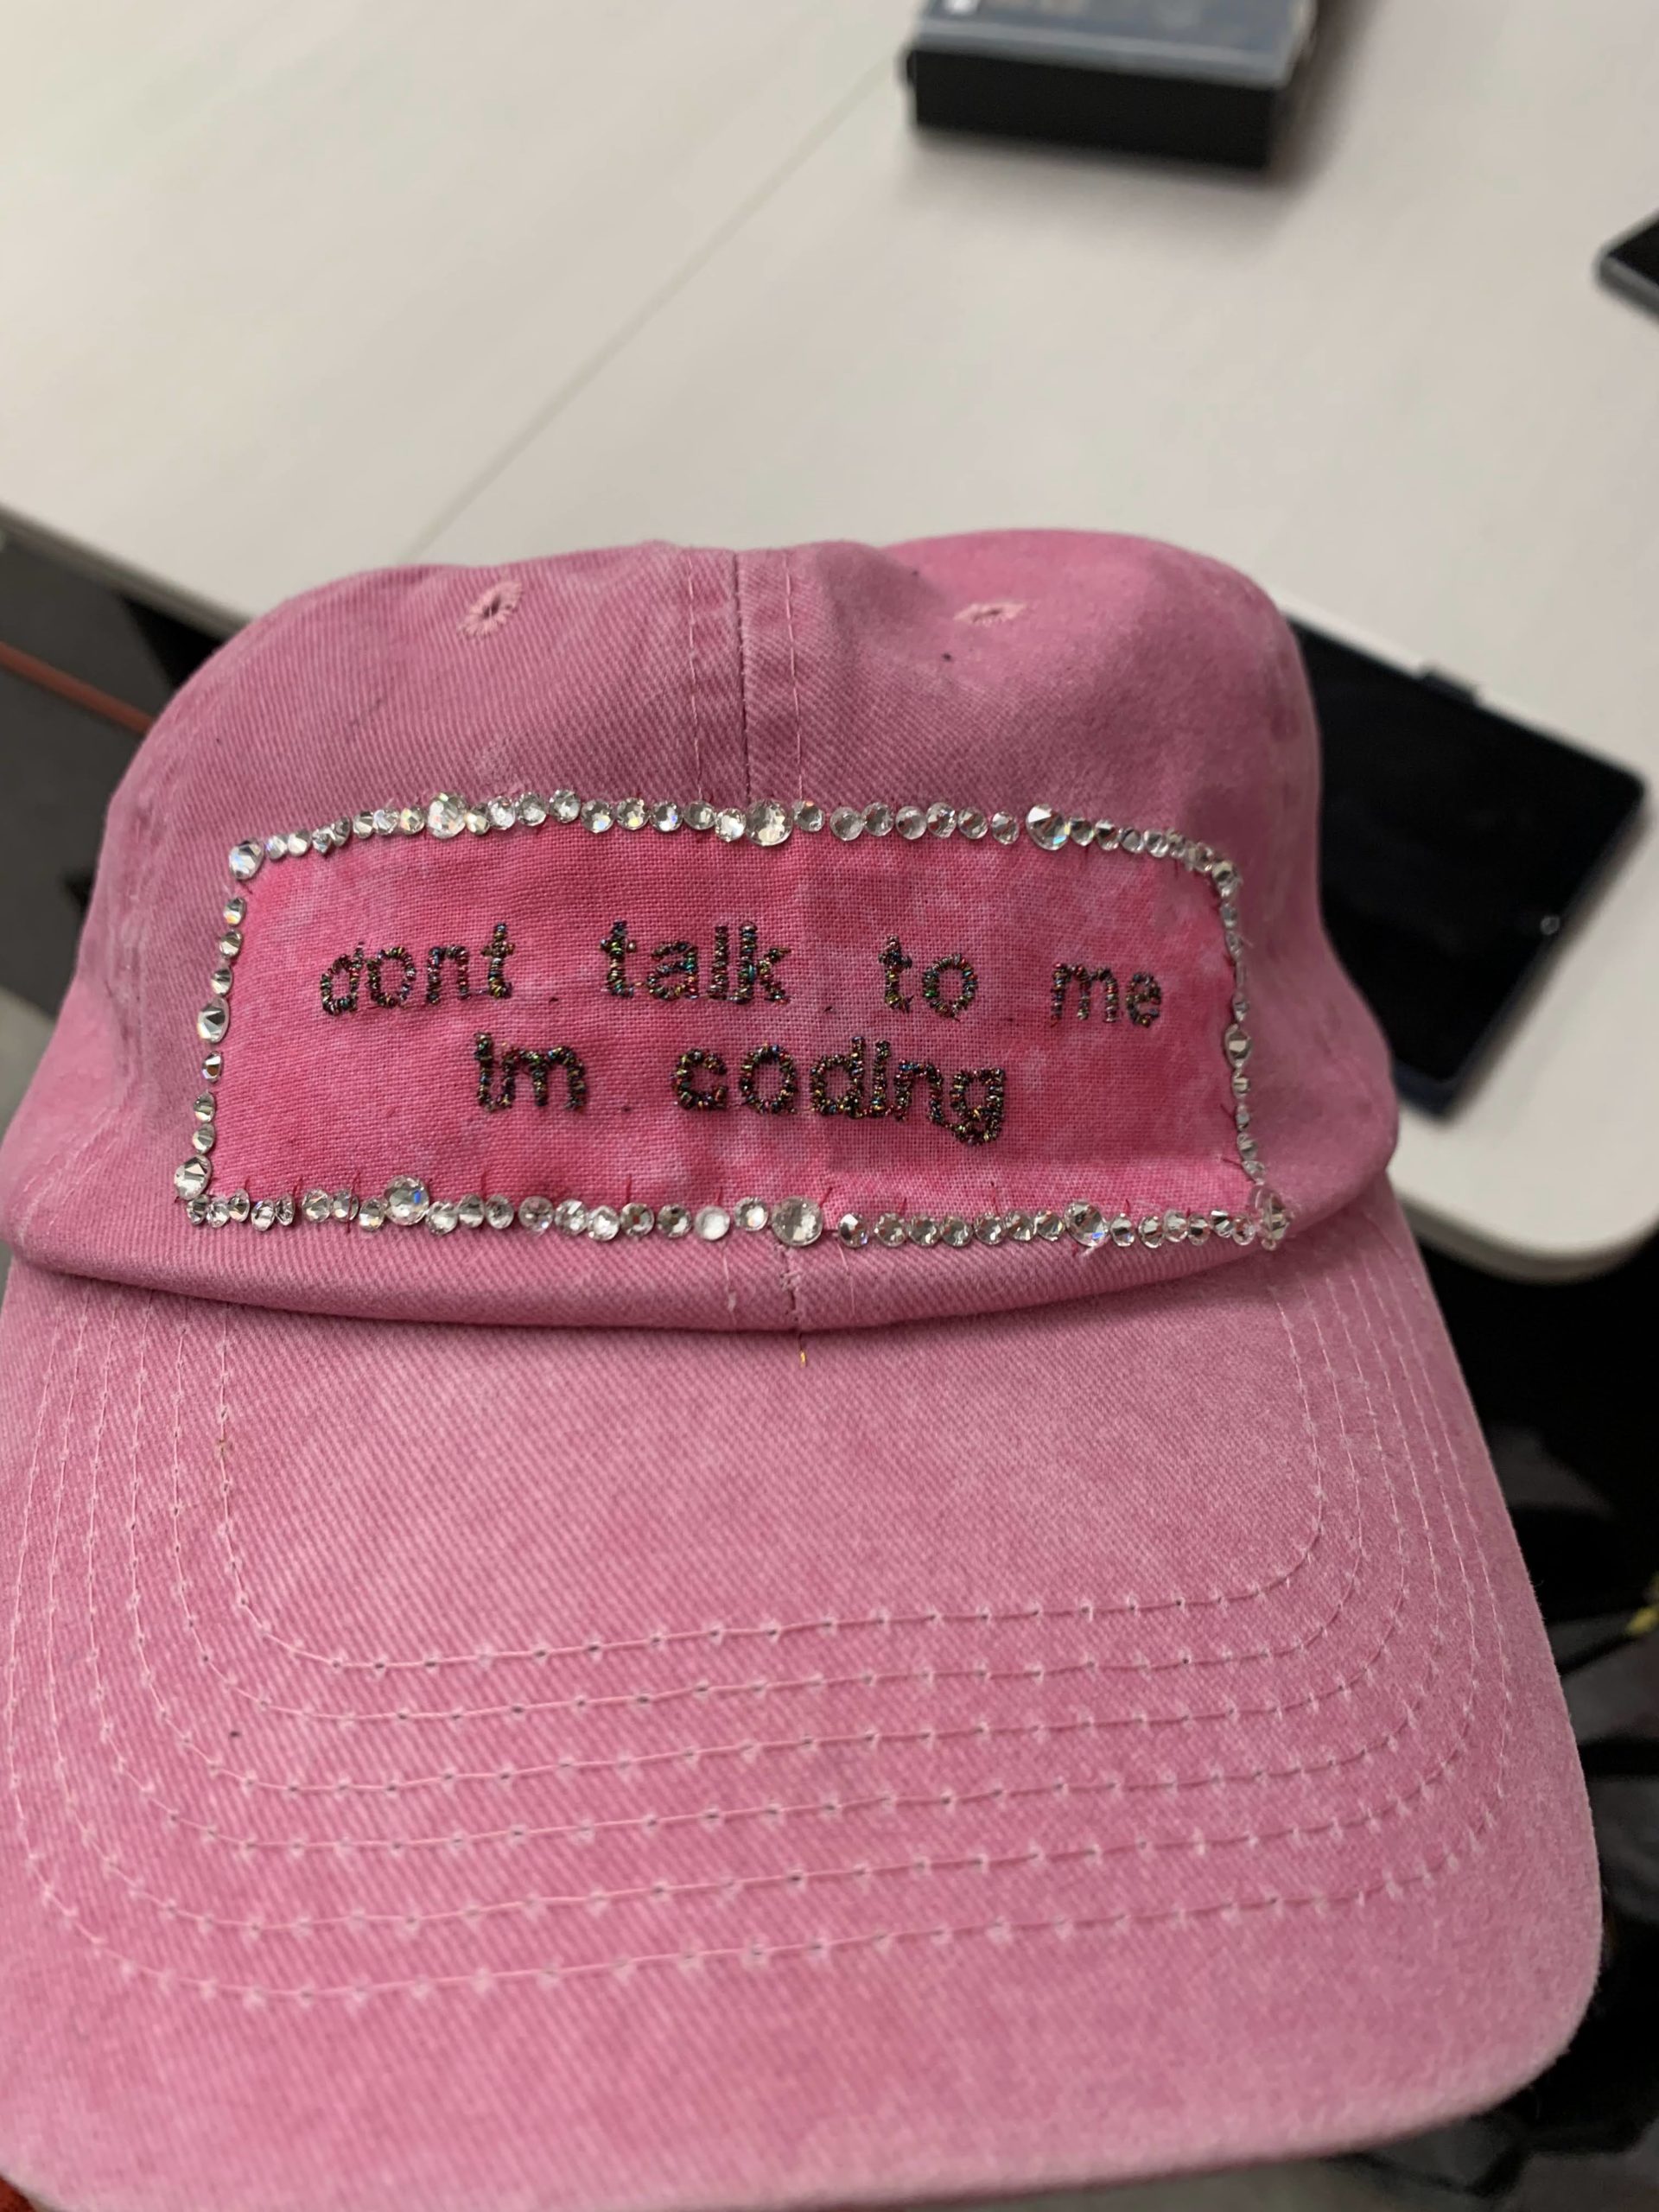 A pink hat reading "dont talk to me I'm coding"